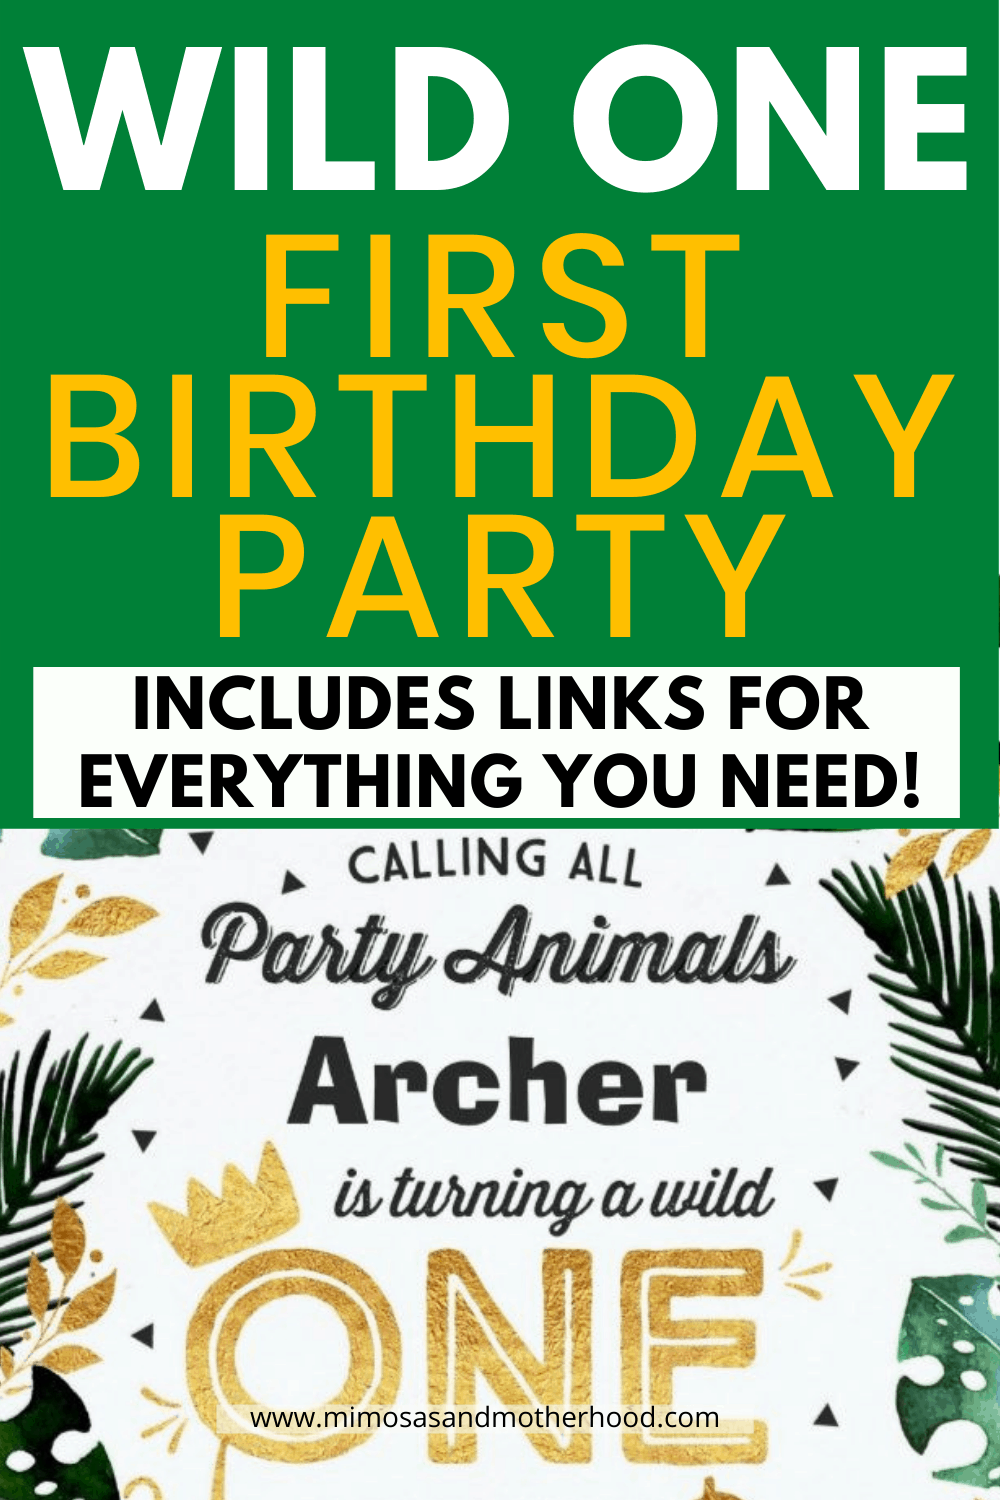 Text: Wild one first birthday party, includes links for everything you need. Calling all party animals, Archer is turning a wild one.